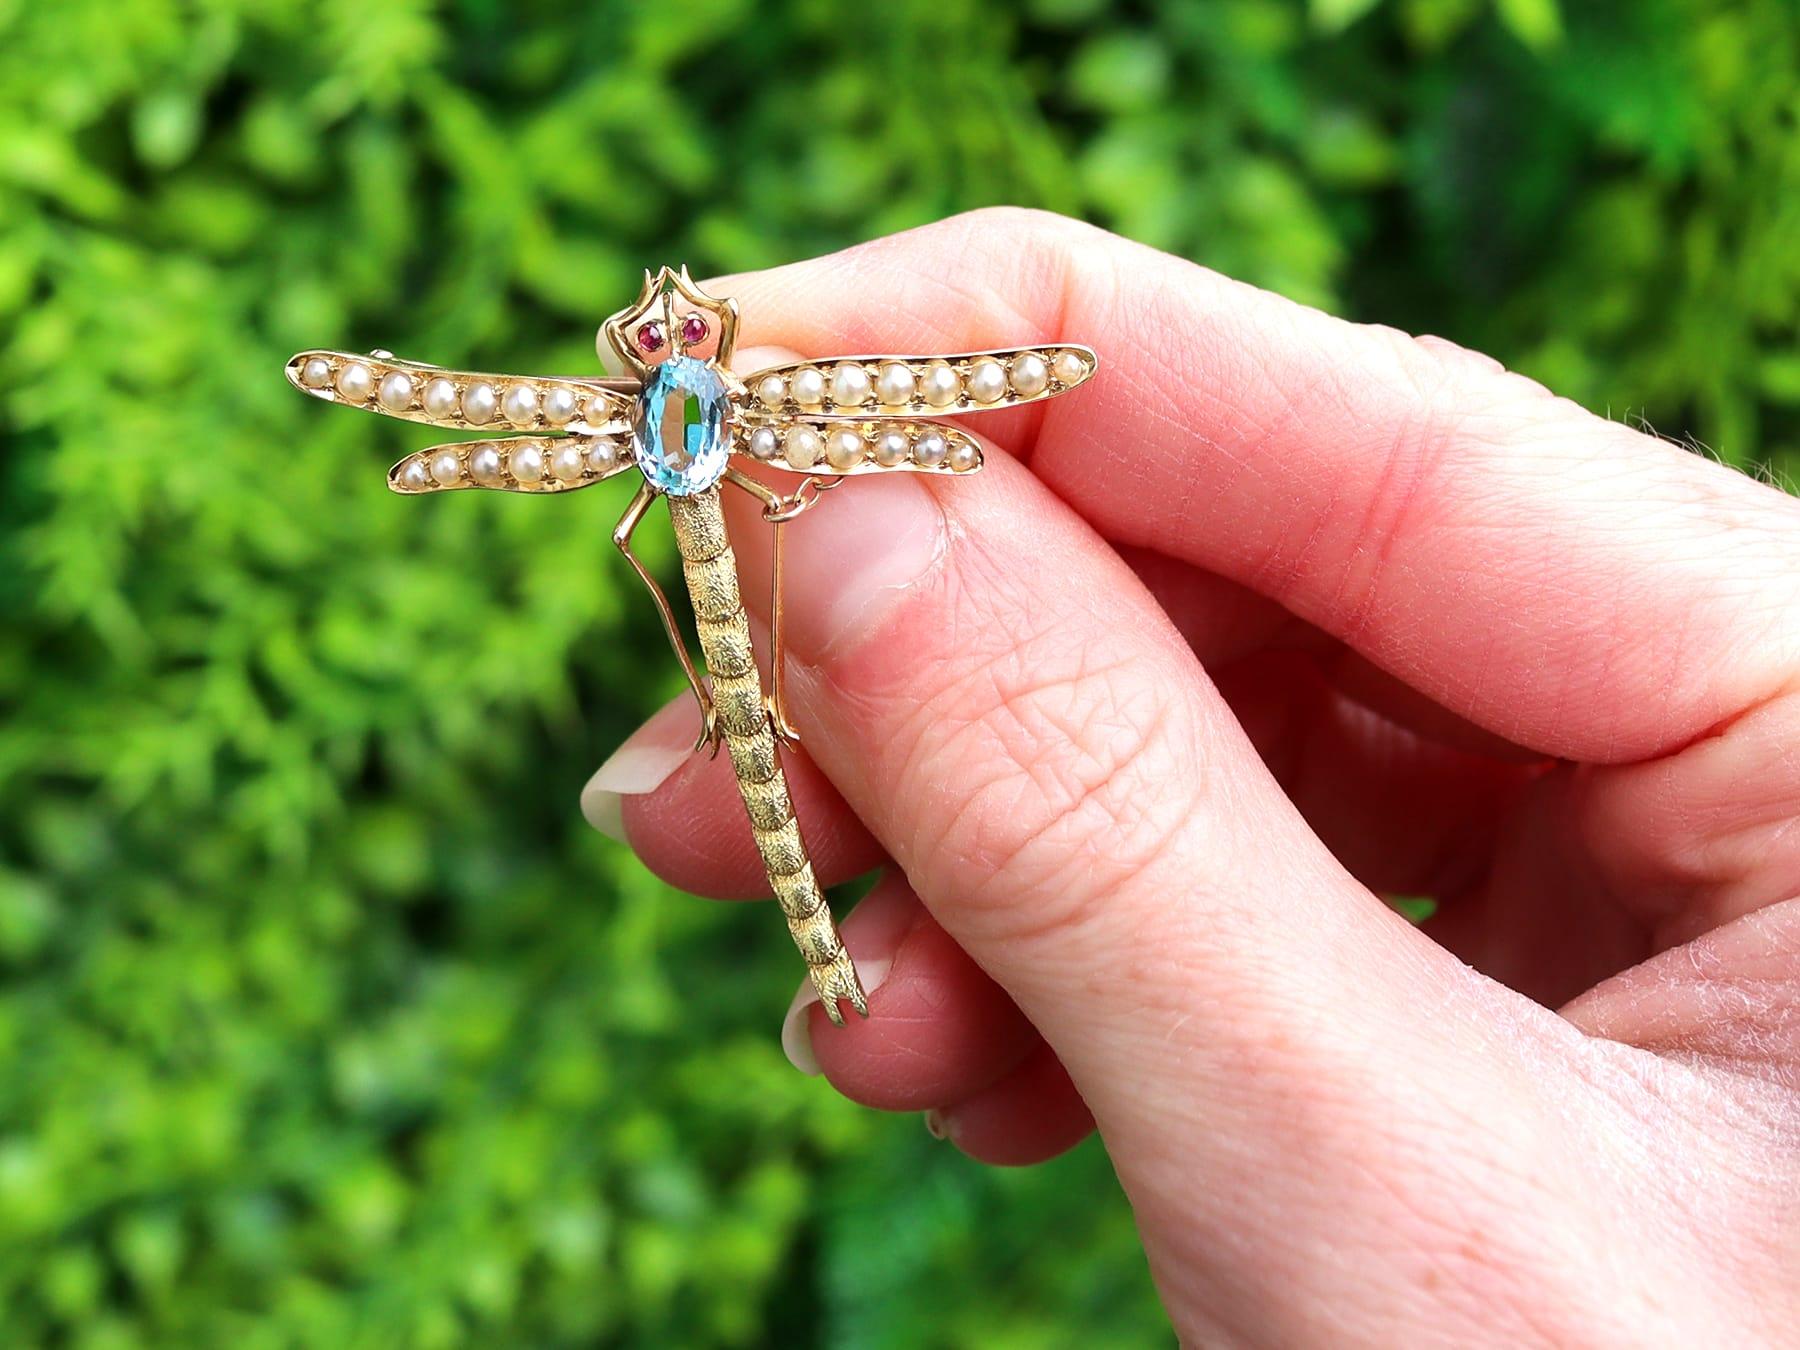 A stunning, fine and impressive antique 0.87 carat aquamarine, ruby and pearl, 15 karat yellow gold brooch in the form of a dragonfly; part of our diverse antique jewellery collections.

This stunning, fine and impressive antique brooch has been